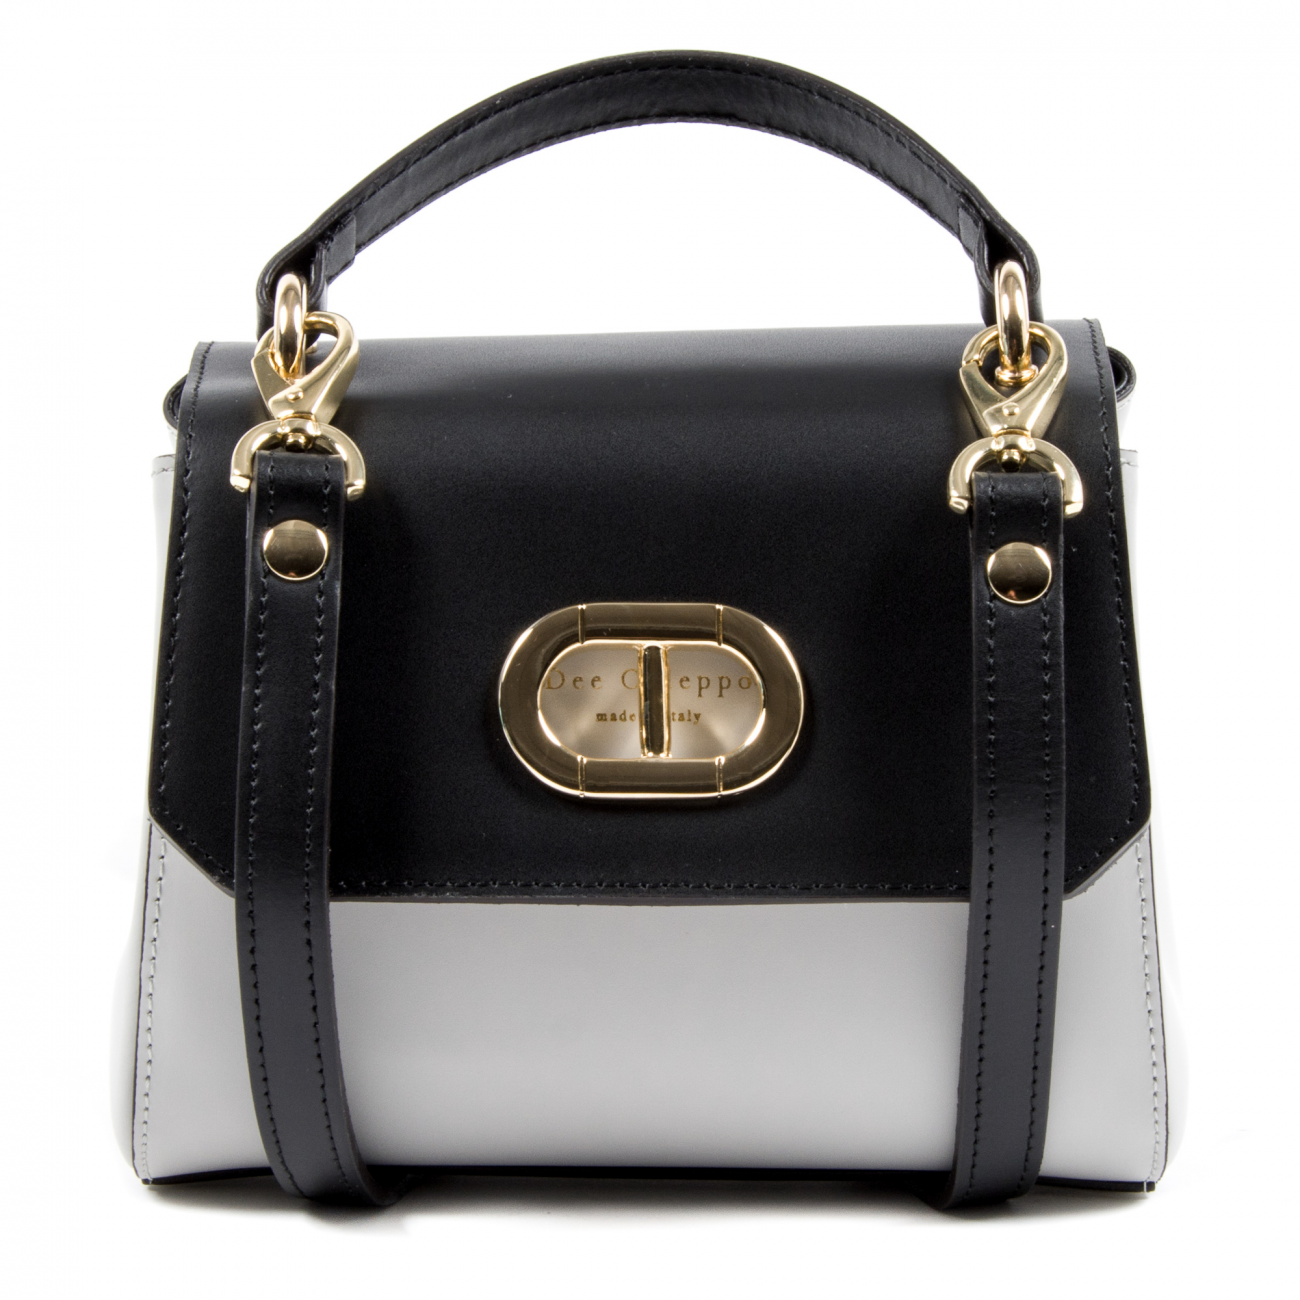 Details: N862M POLVERE NERO - Color: Grey - Composition: 100% LEATHER - Measures (Width-Height-Depth): 18x14x8 cm - Made: ITALY - Front Logo - Botton Closure - Logo Inside - Removable Shoulder Strap